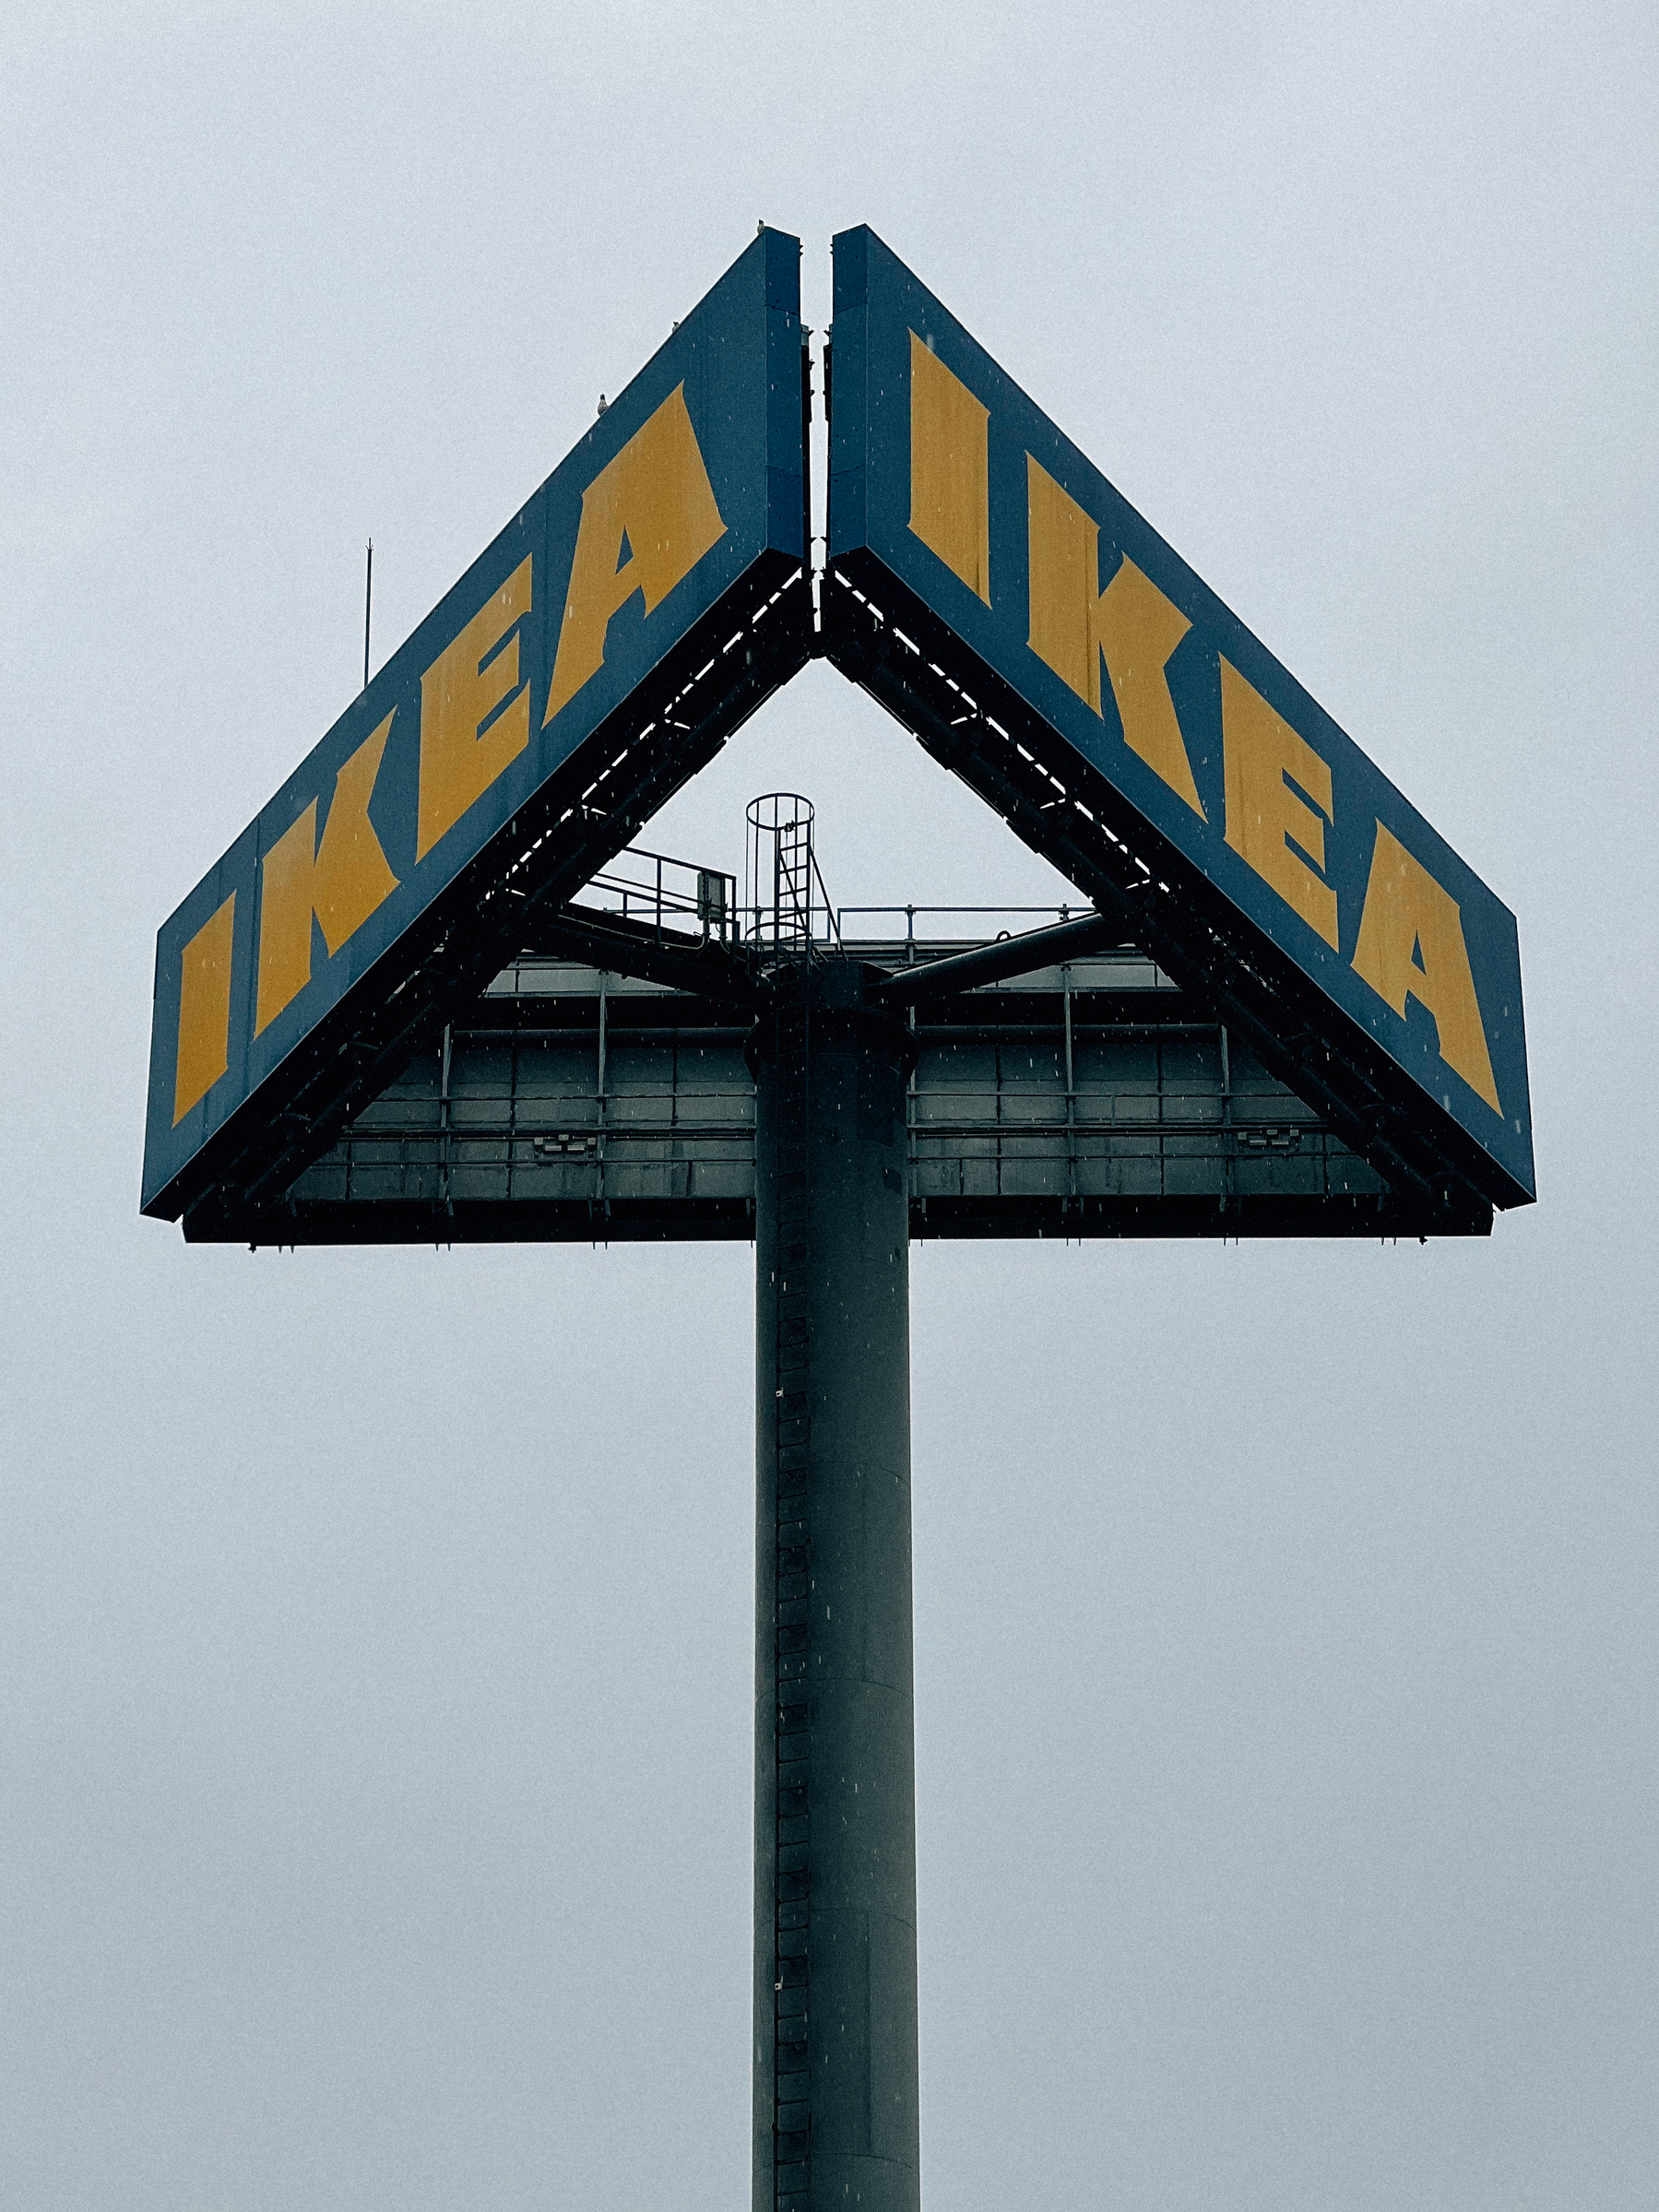 Large IKEA sign on a post against a cloudy sky.